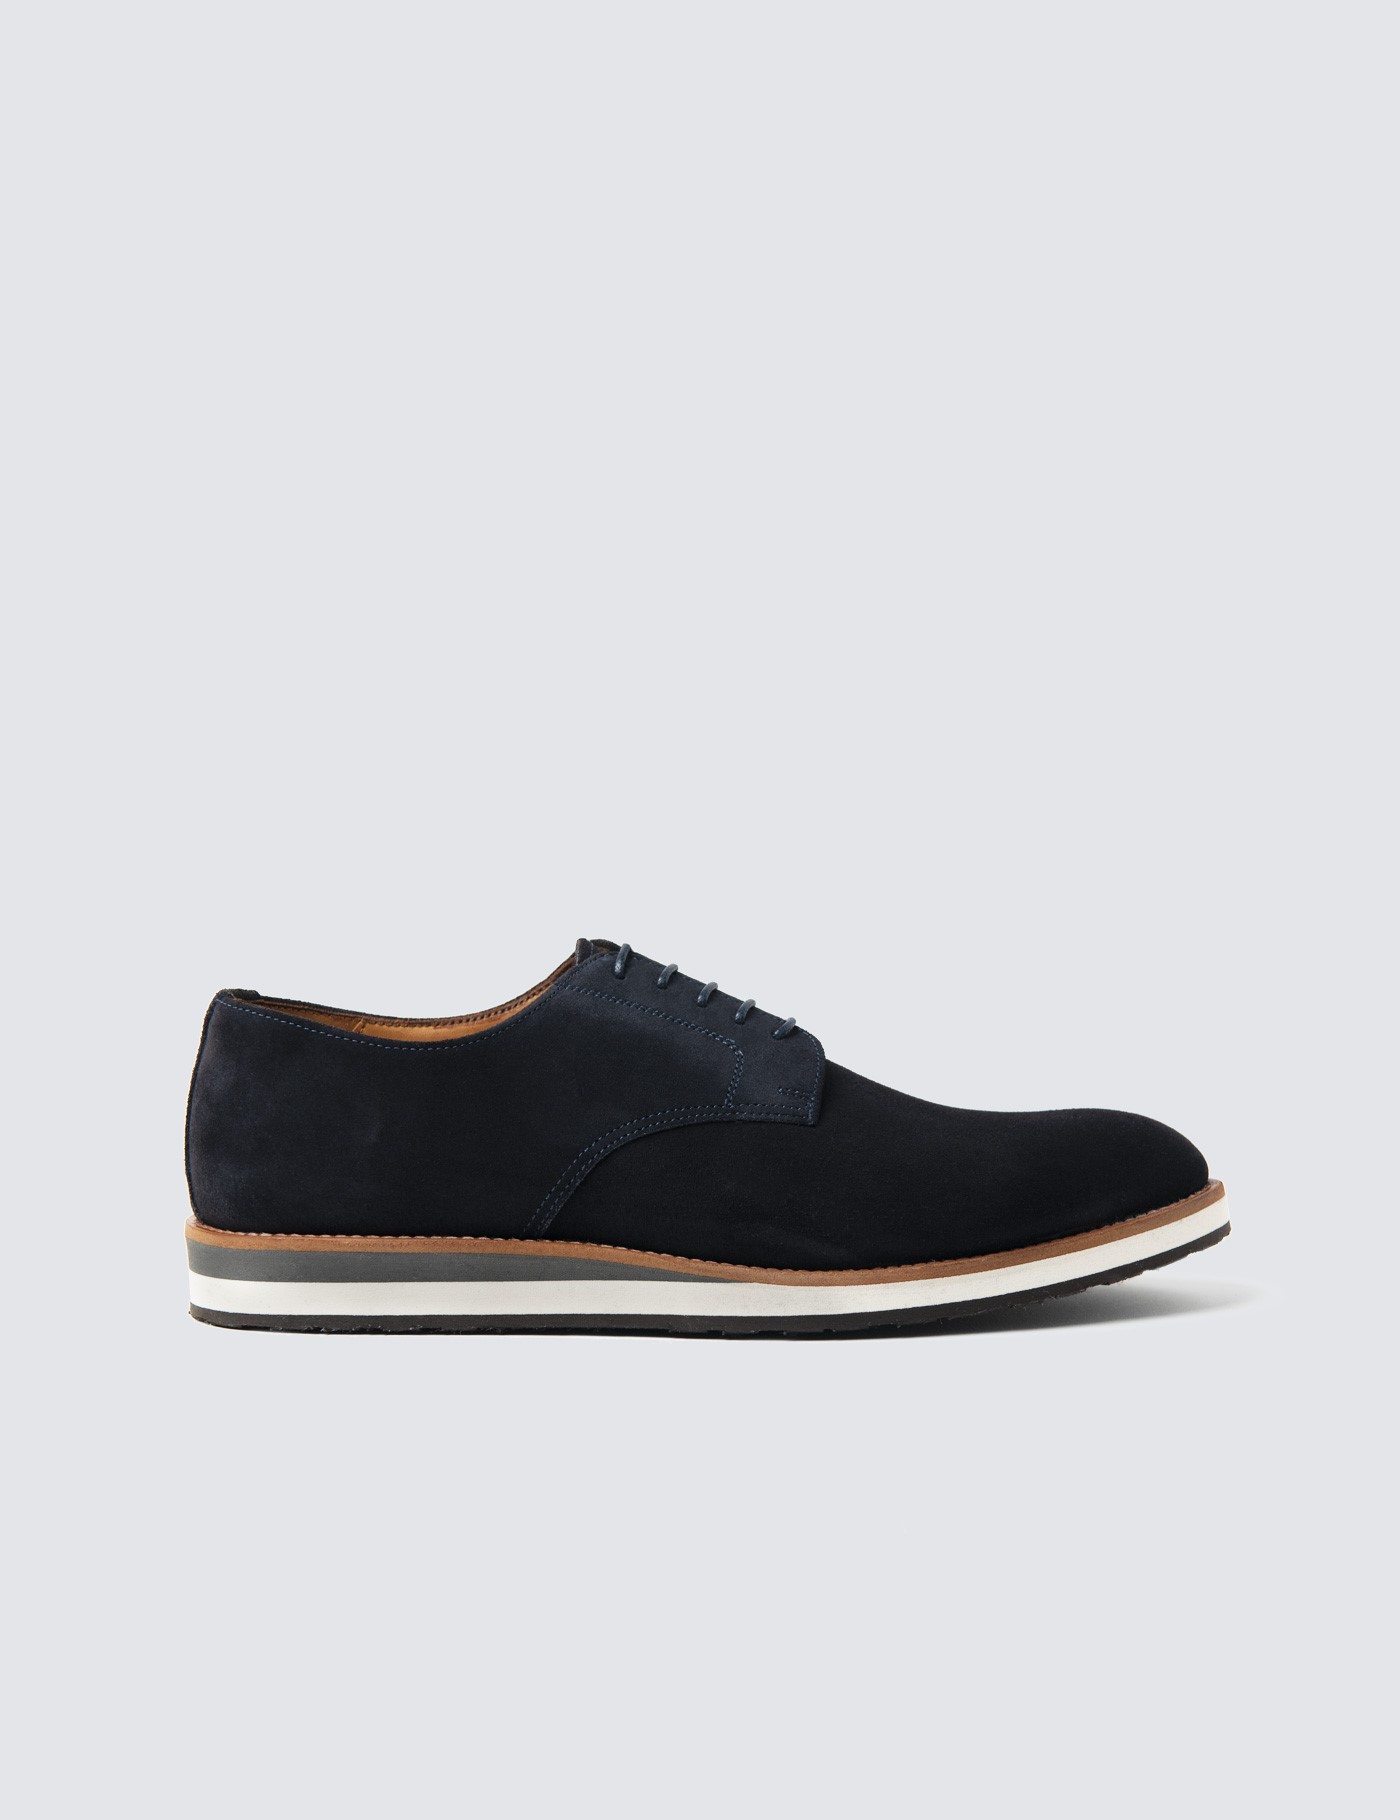 100% Leather Men's Trainers with Rubber outsole in Navy | Hawes ...